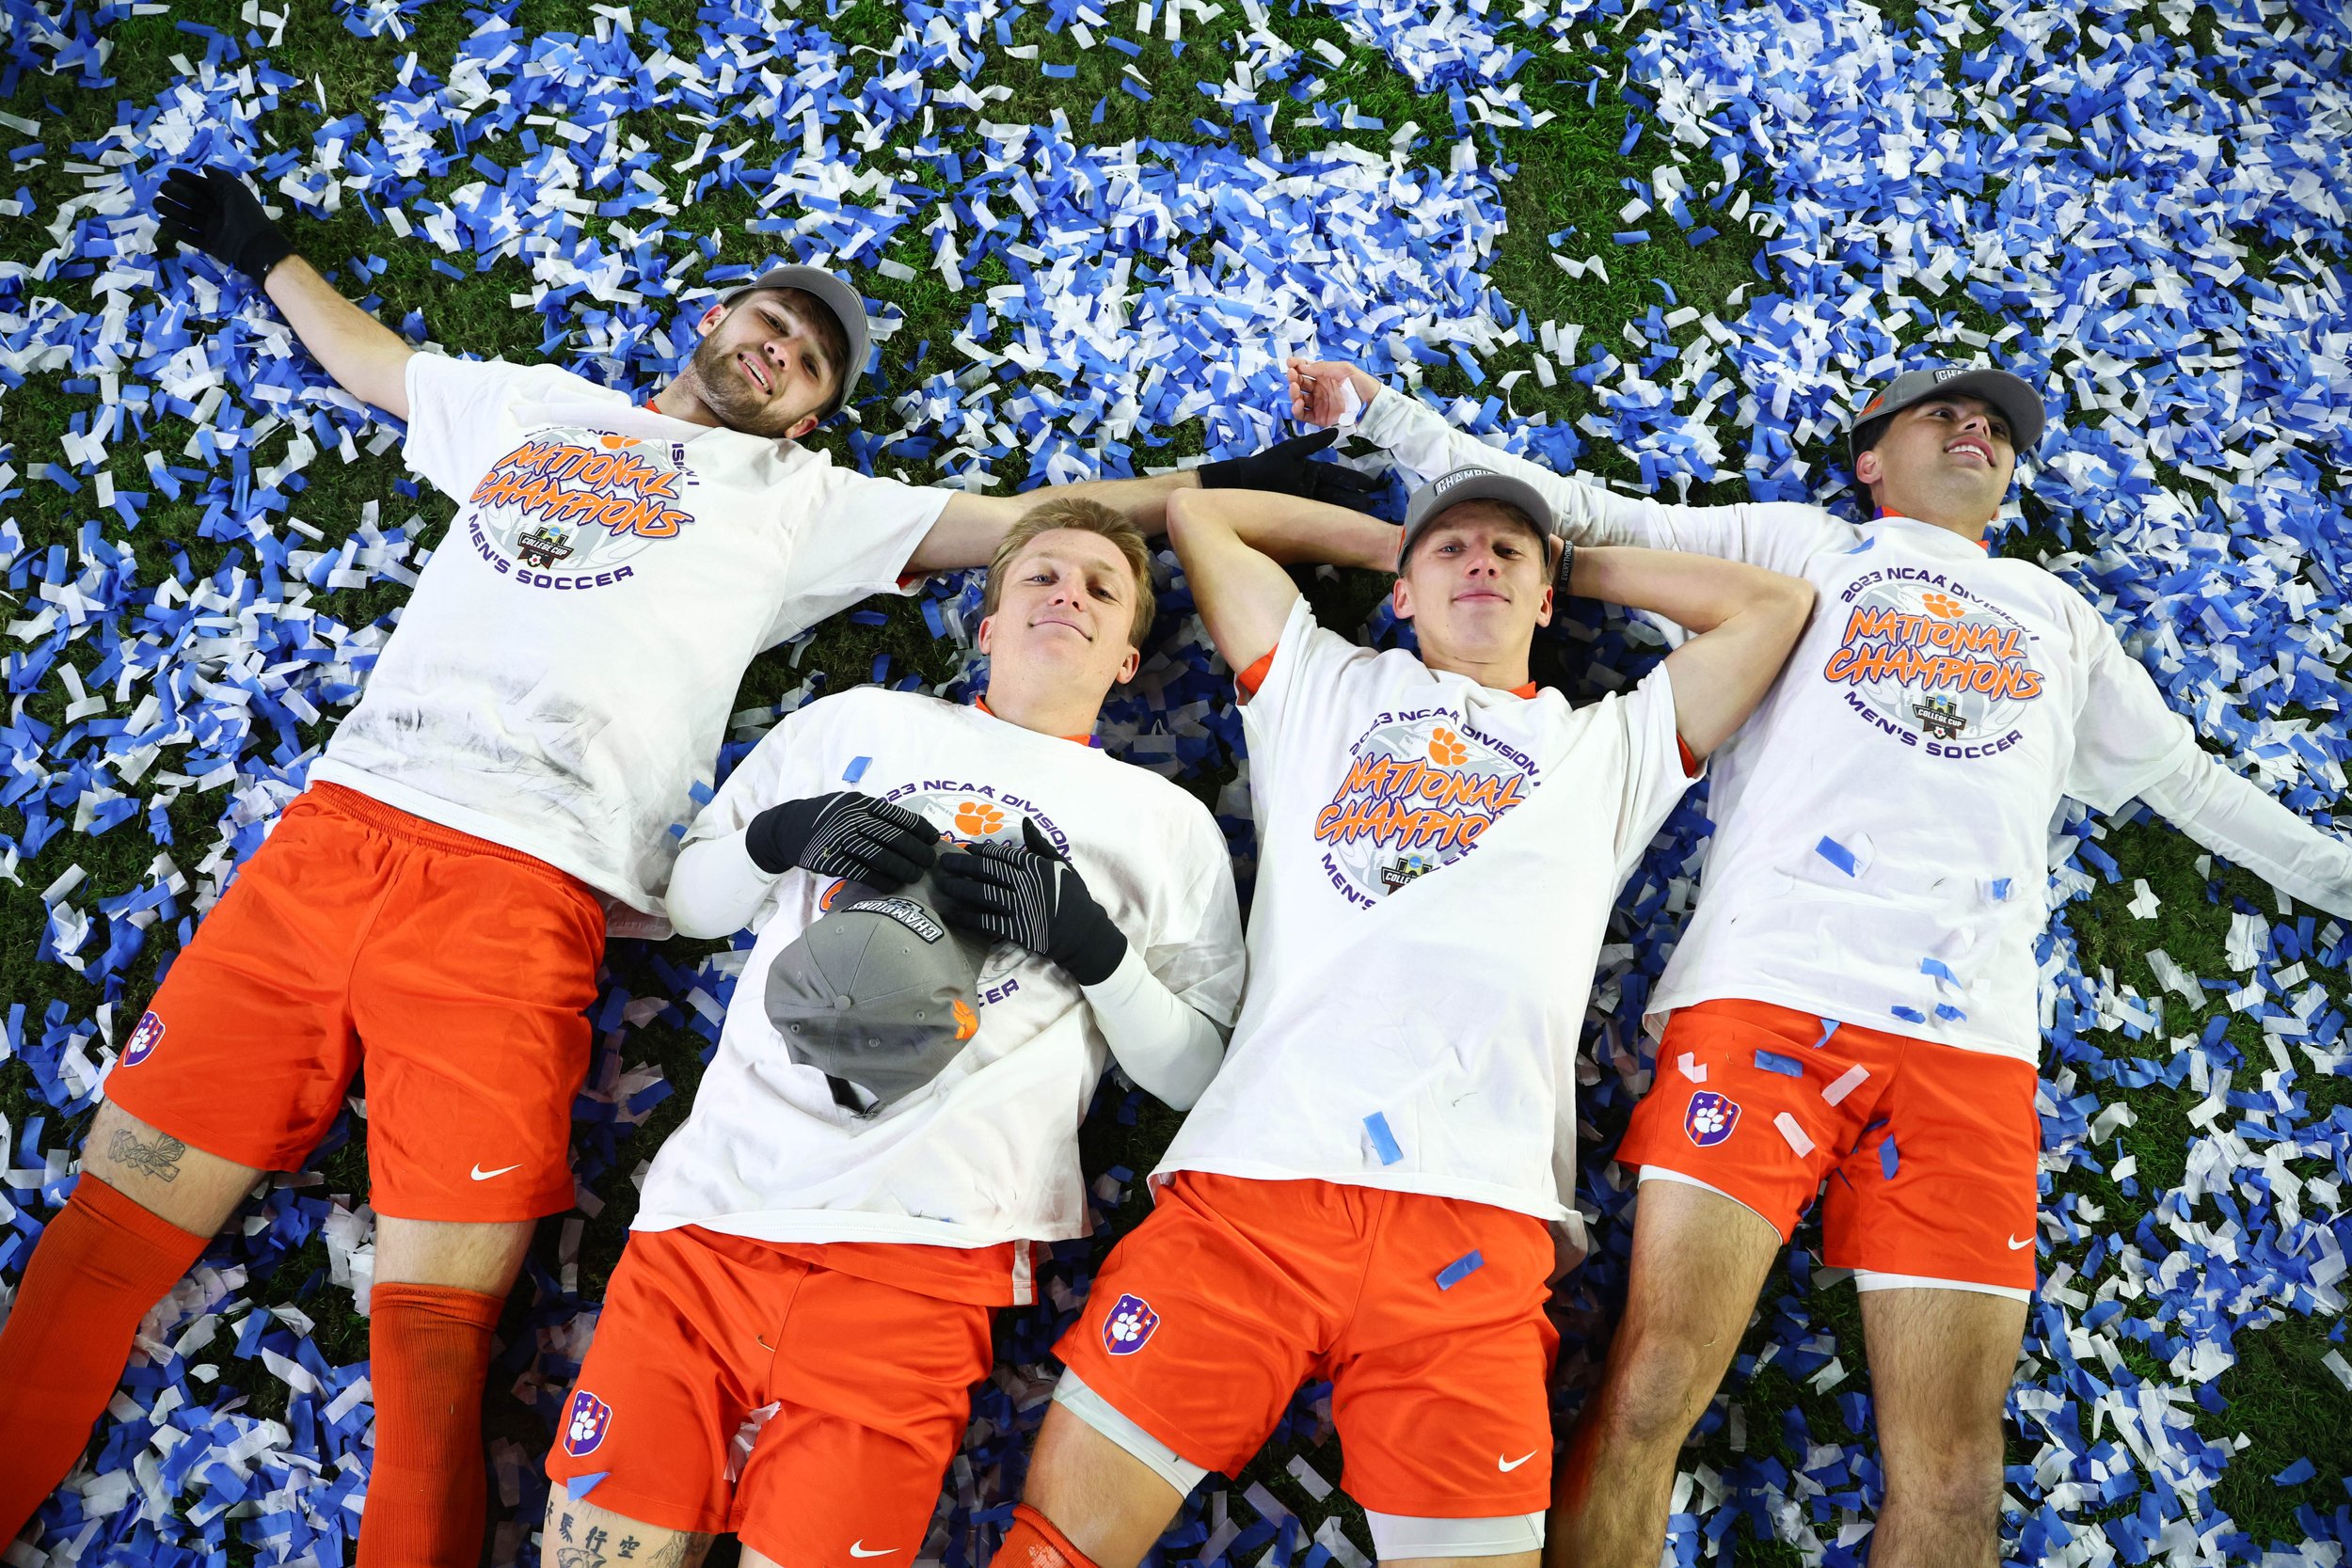  LOUISVILLE, KENTUCKY - DECEMBER 11: The Clemson Tigers celebrate after defeating the Notre Dame Fighting Irish during the Division I Men’s Soccer Championship held at the Lynn Family Stadium on December 11, 2023 in Louisville, Kentucky. (Photo by Ja